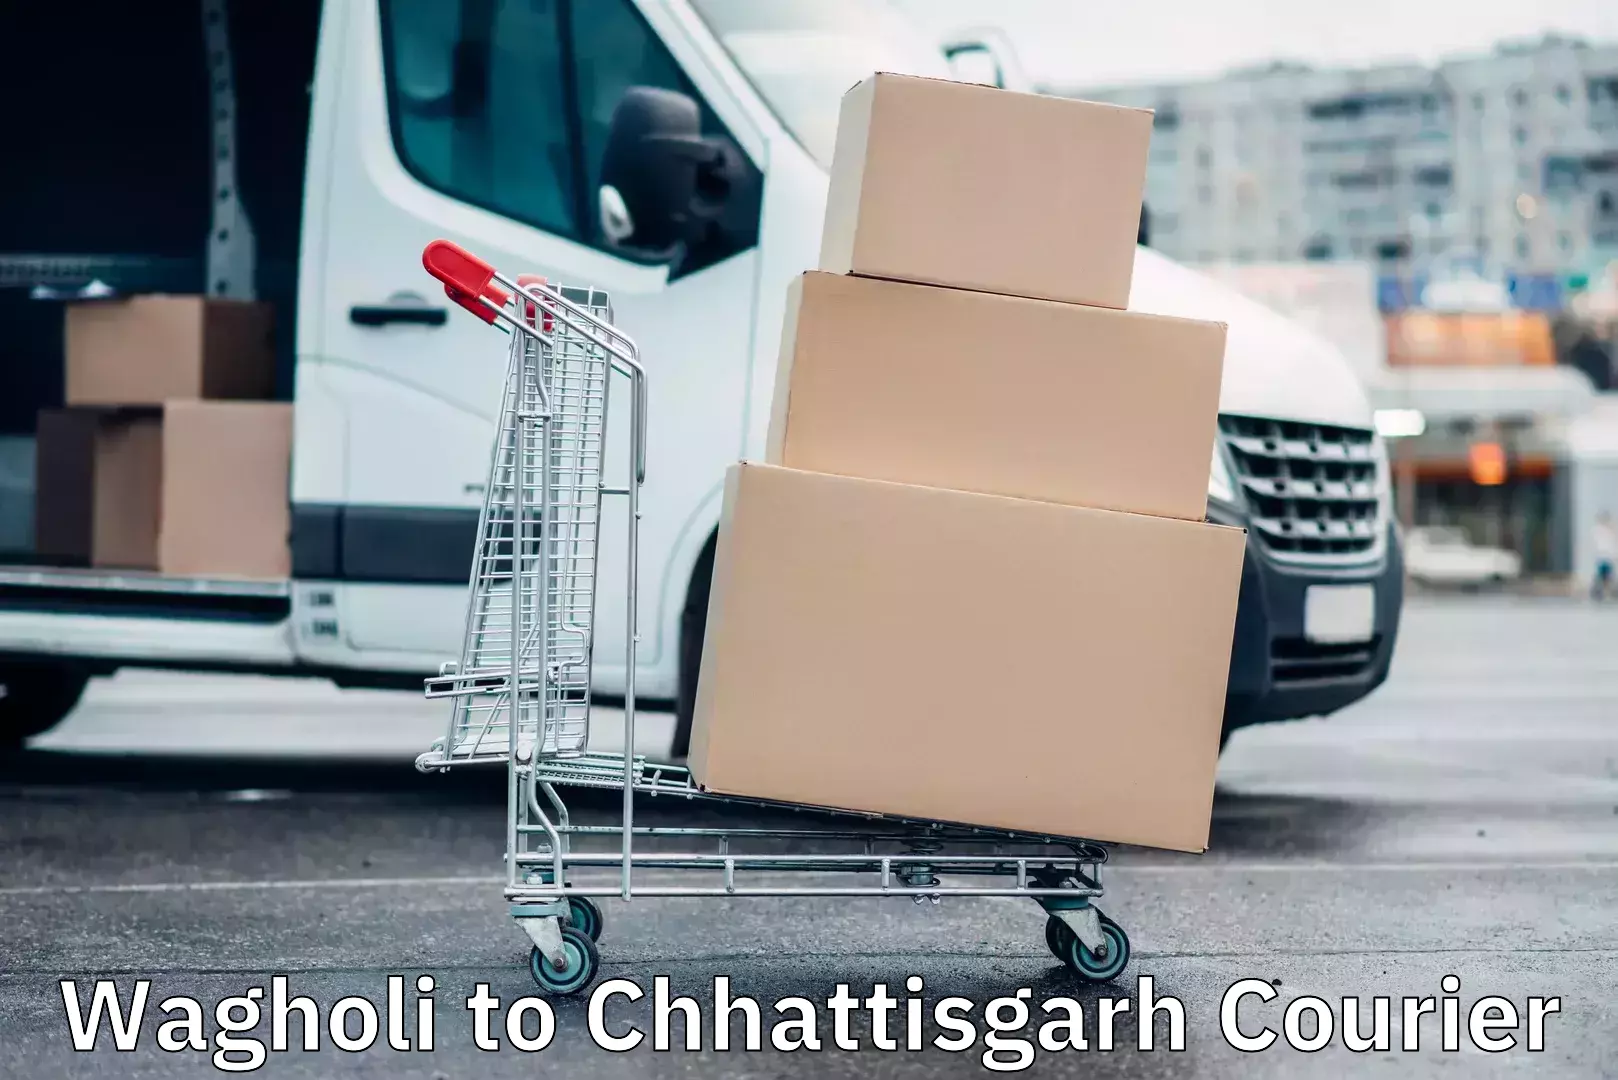 State-of-the-art courier technology in Wagholi to Chhattisgarh